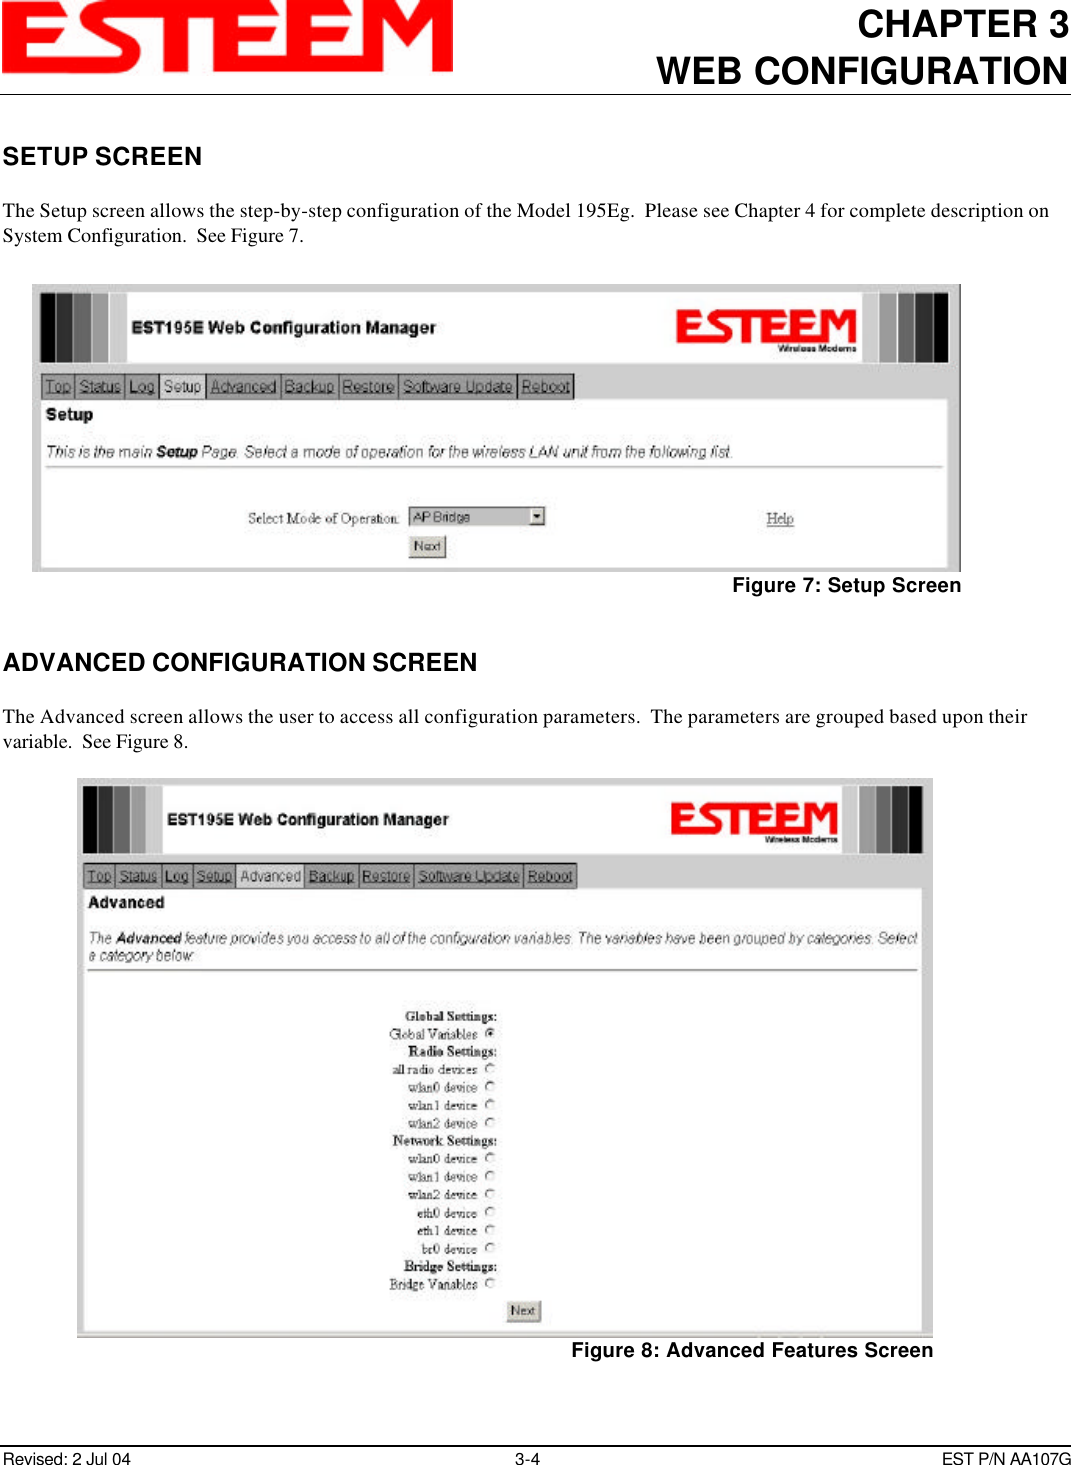 CHAPTER 3WEB CONFIGURATIONRevised: 2 Jul 04 3-4EST P/N AA107GSETUP SCREENThe Setup screen allows the step-by-step configuration of the Model 195Eg.  Please see Chapter 4 for complete description onSystem Configuration.  See Figure 7.ADVANCED CONFIGURATION SCREENThe Advanced screen allows the user to access all configuration parameters.  The parameters are grouped based upon theirvariable.  See Figure 8.Figure 7: Setup ScreenFigure 8: Advanced Features Screen